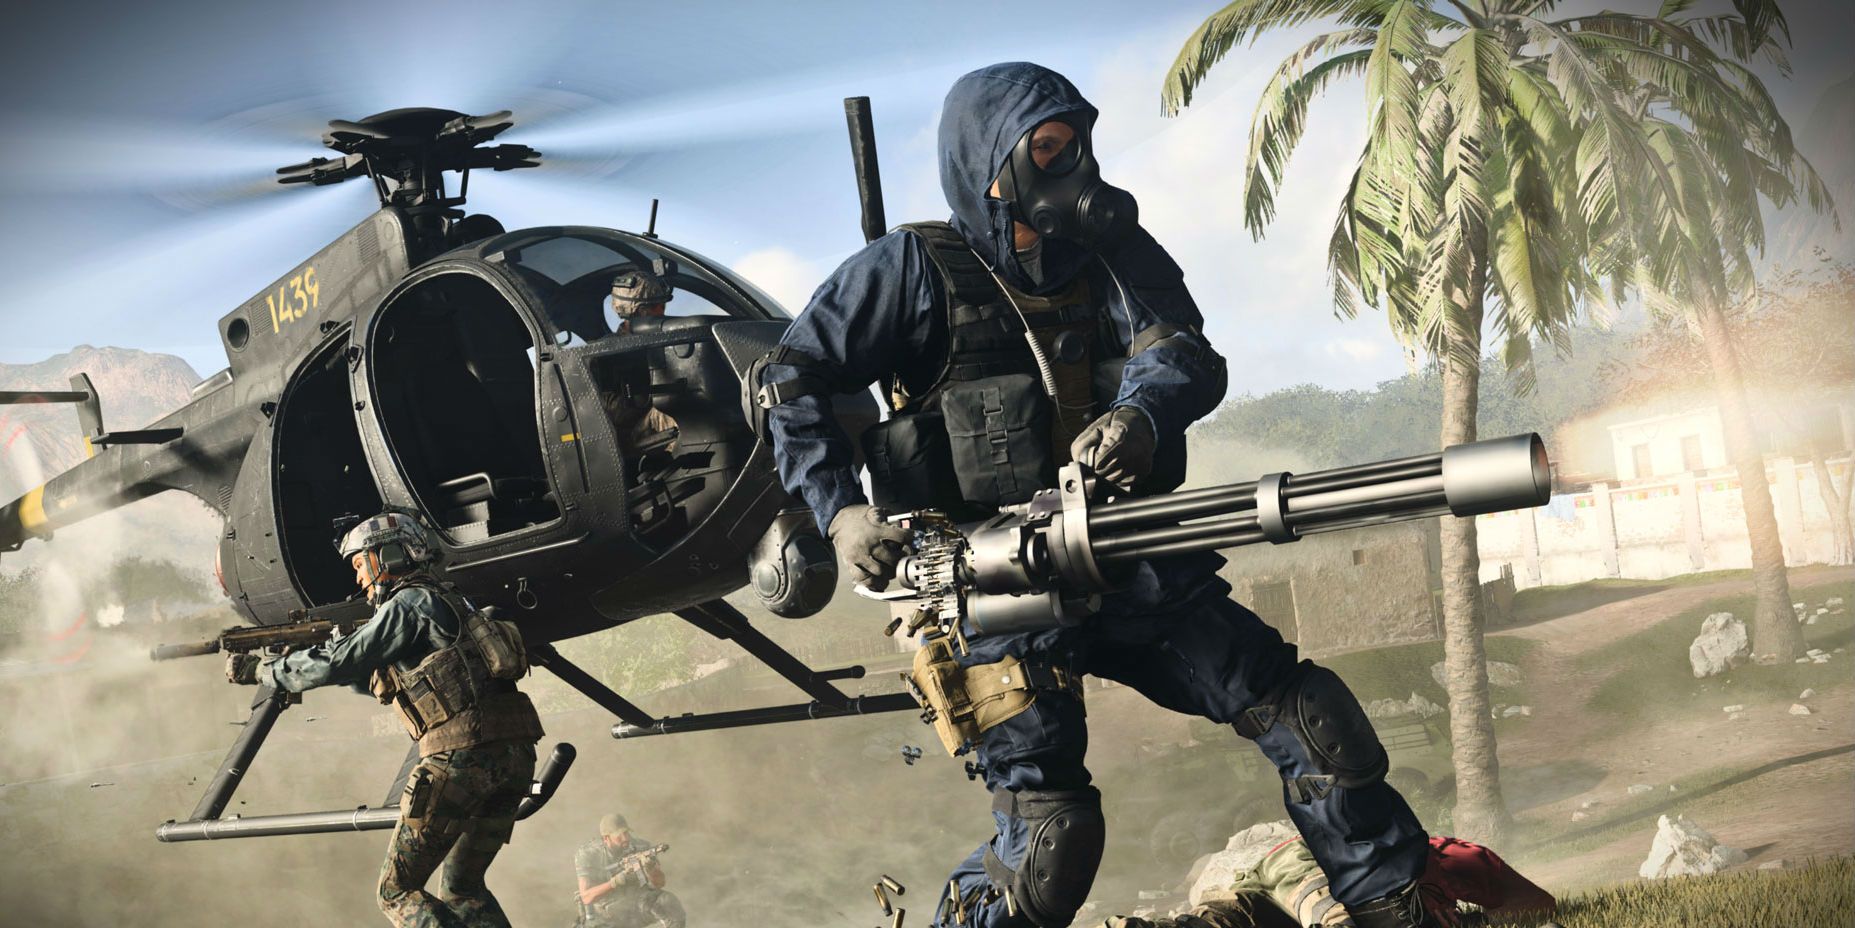 Call of Duty Modern Warfare Adds New Content For Free